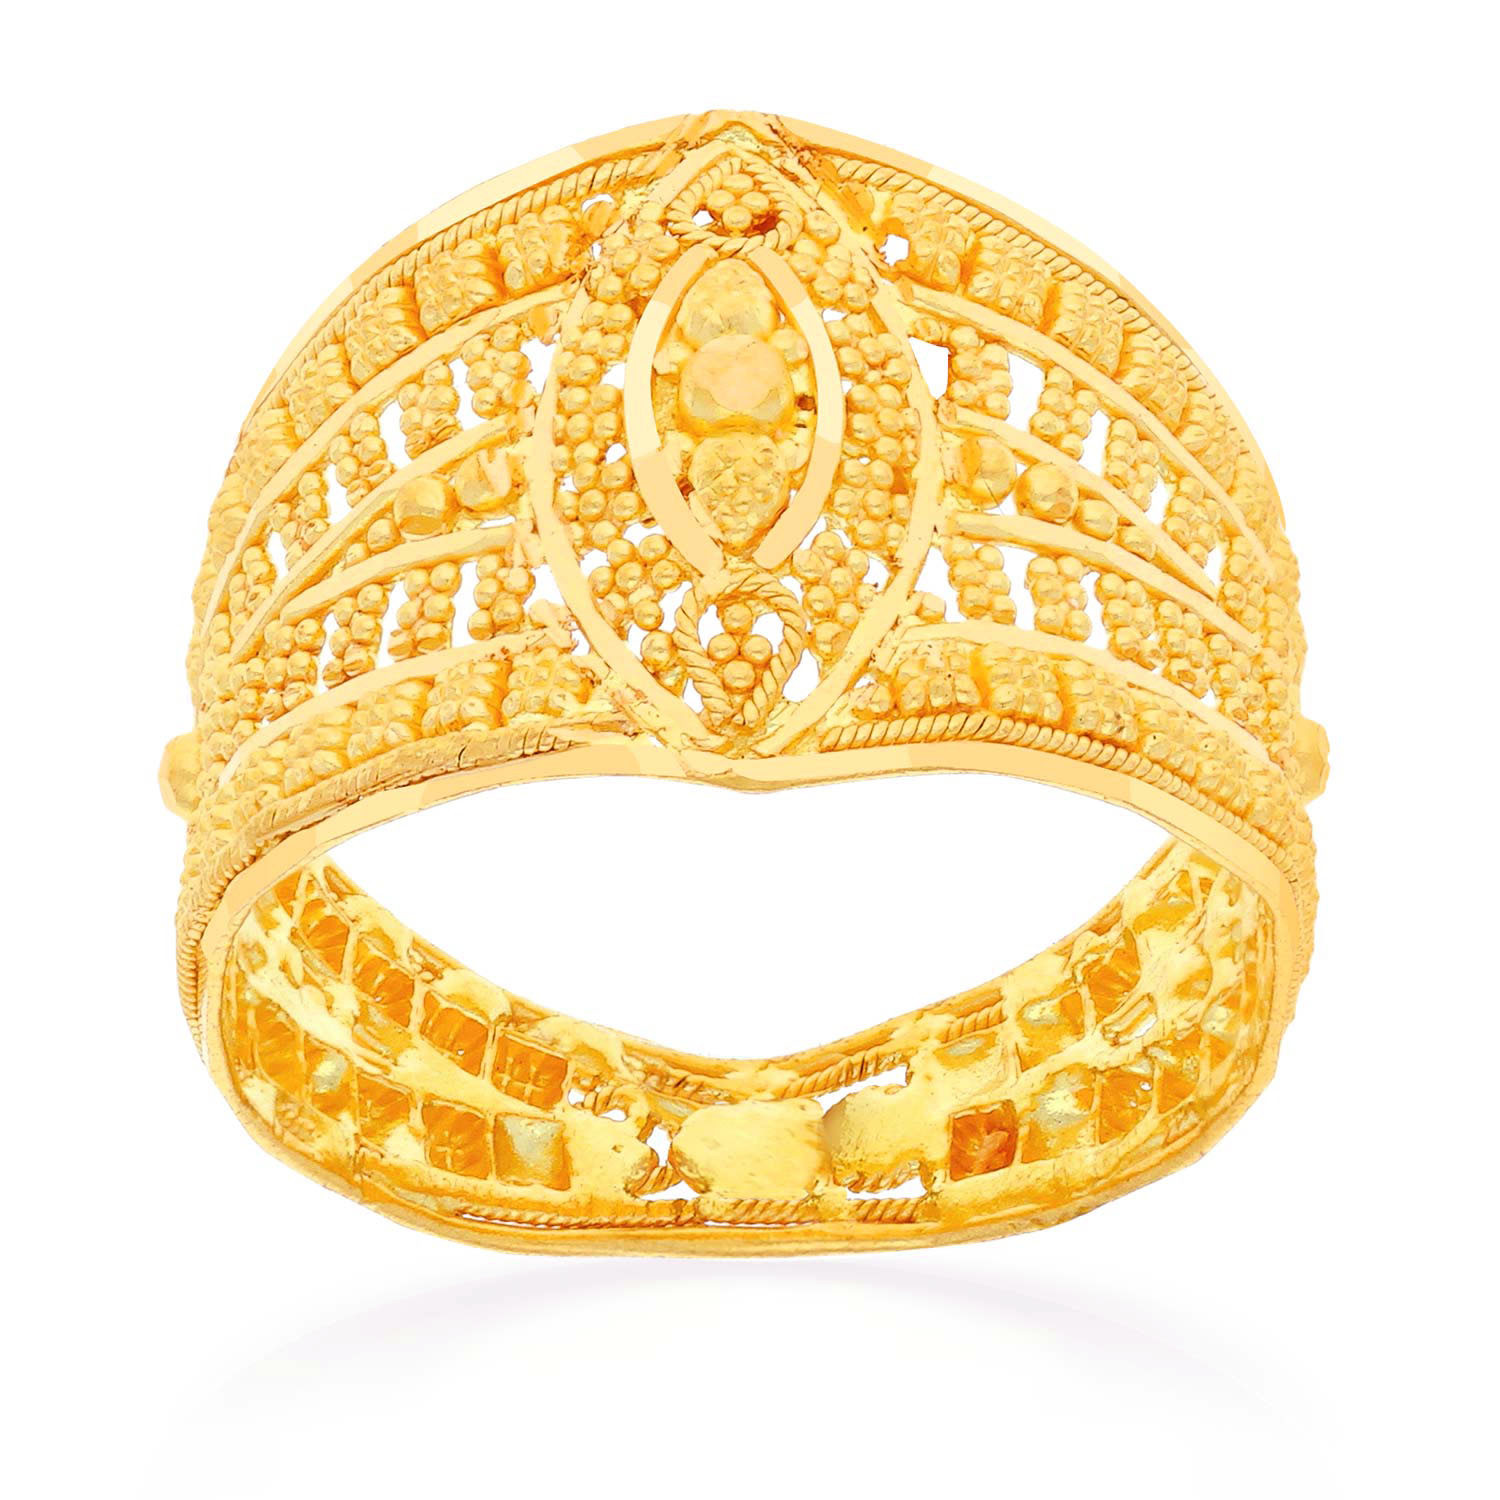 Malabar Gold & Diamonds 22KT Two Colour Gold Ring for Women : Amazon.in:  Jewellery